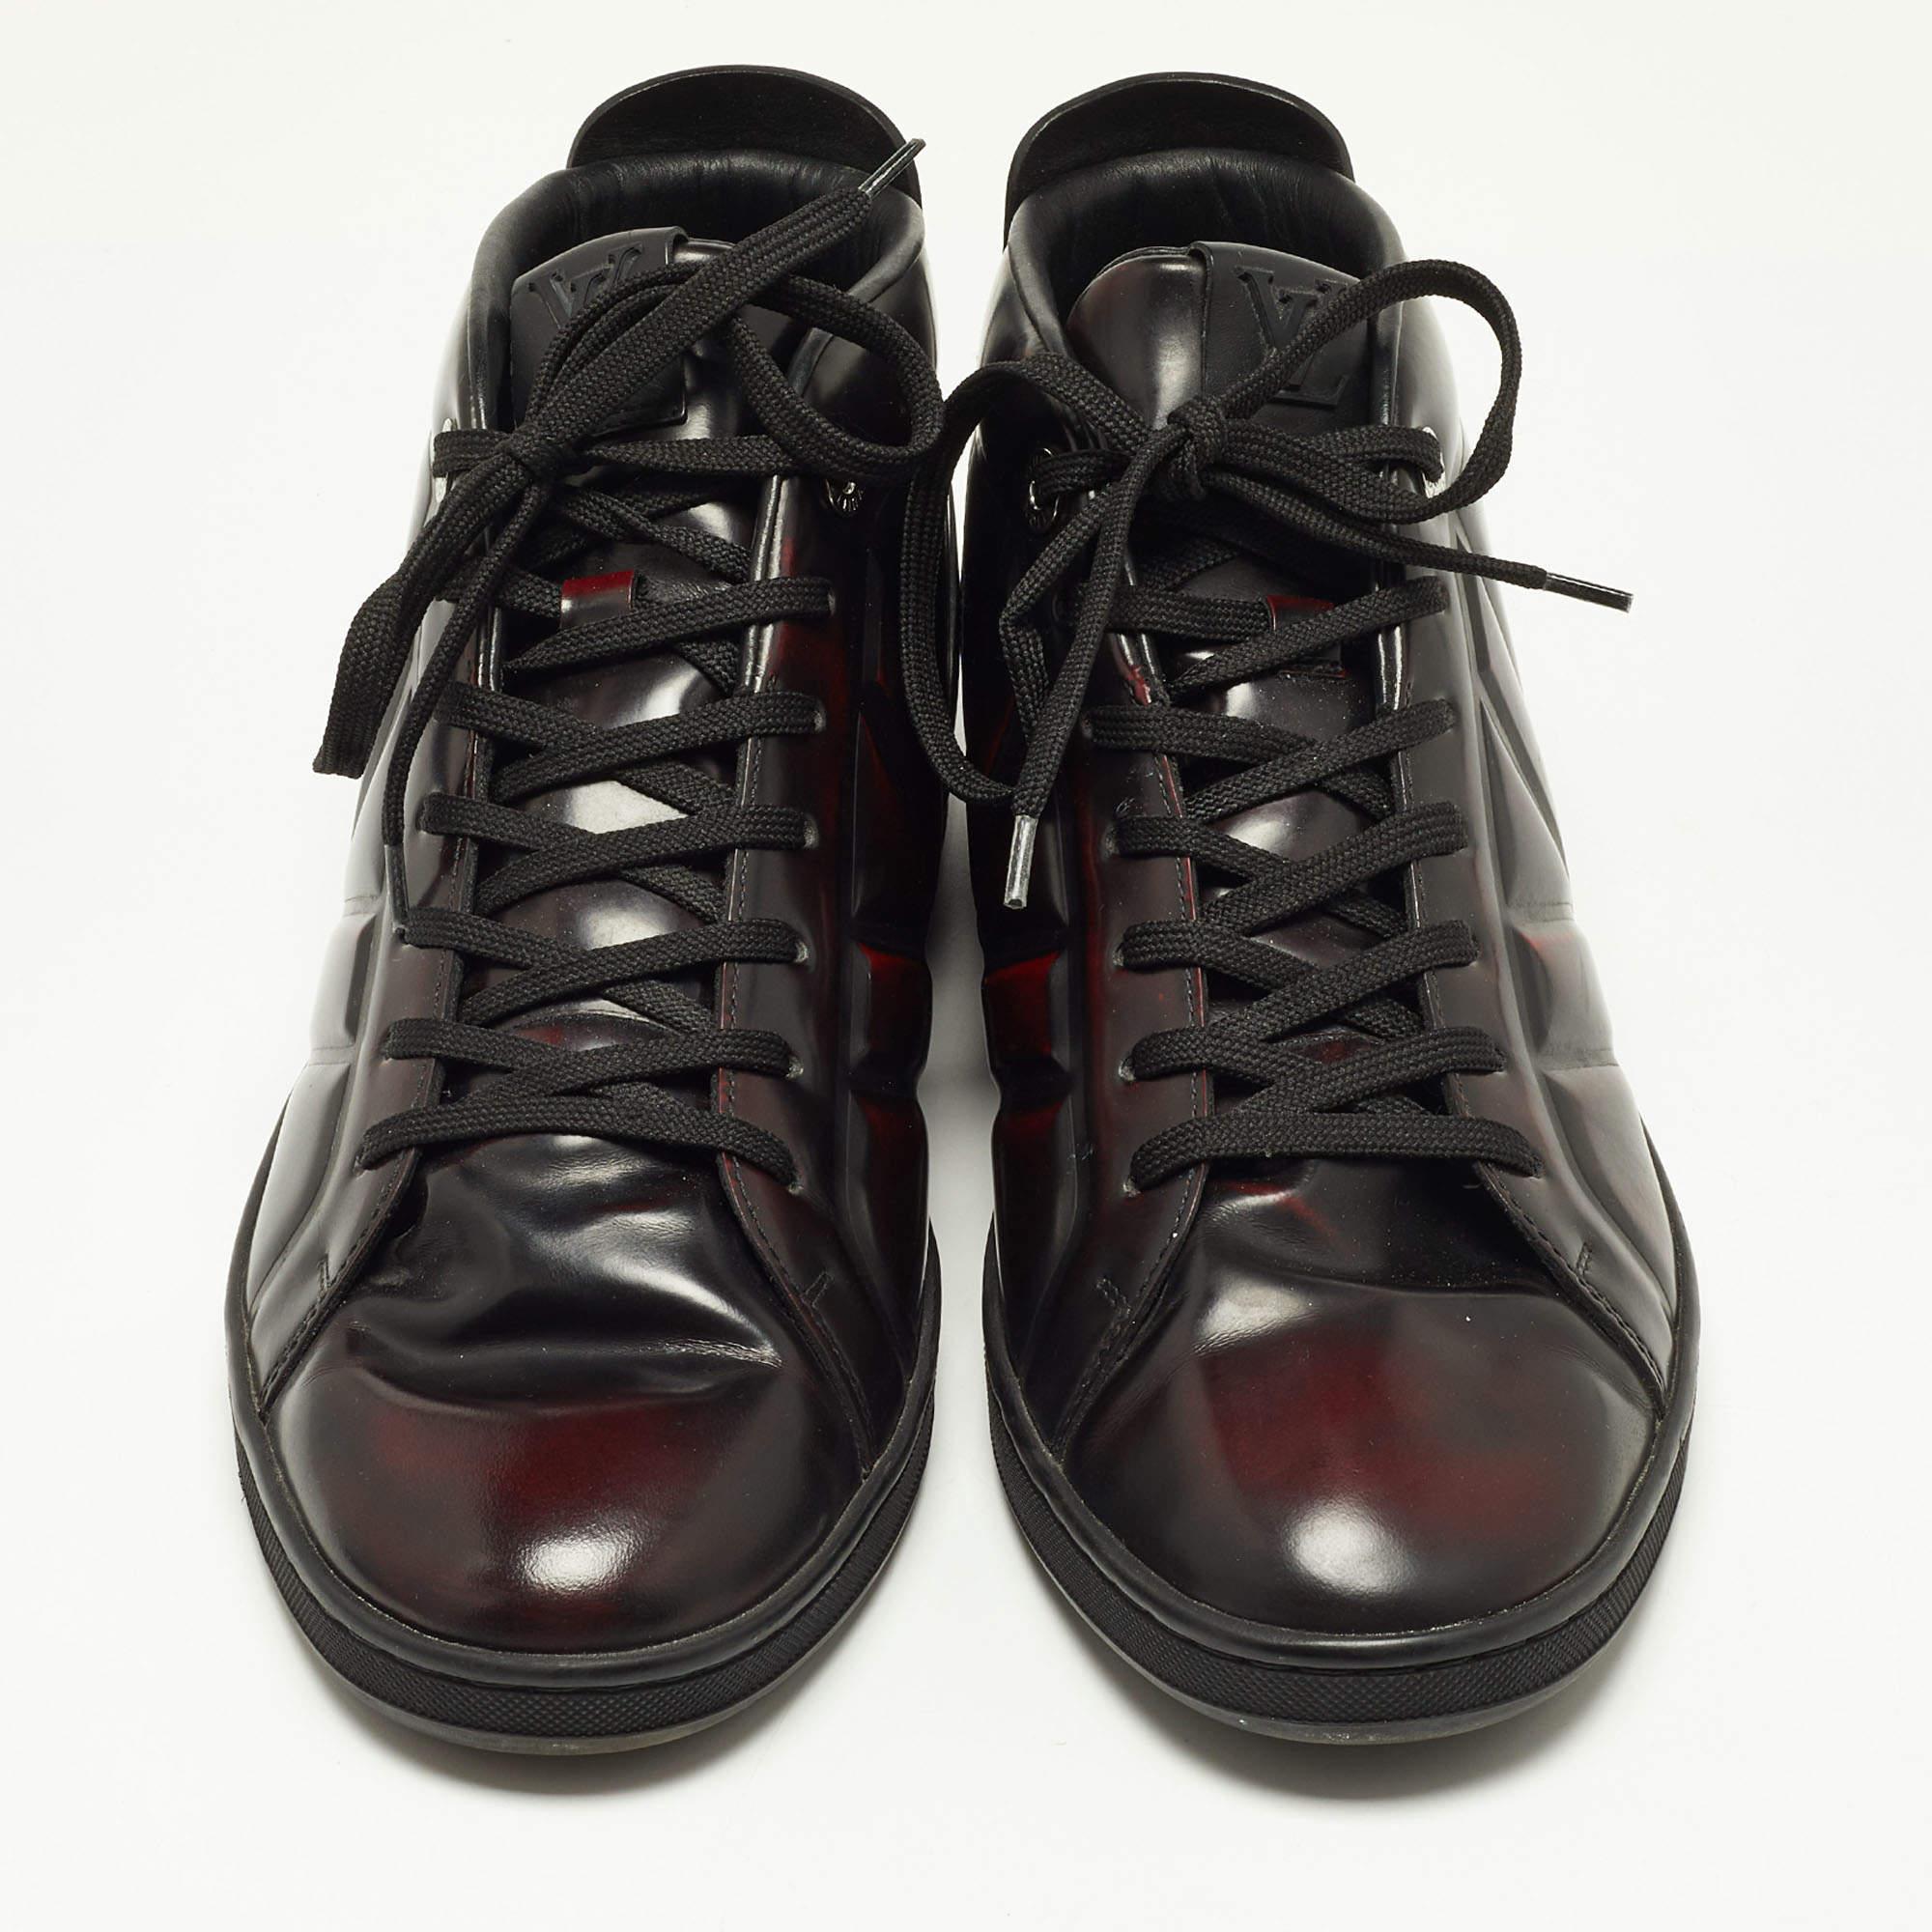 Packed with style and comfort, these Louis Vuitton sneakers are gentle on the feet so that you can glide through the day. They have a sleek upper with lace closure, and they're set on durable rubber soles.

